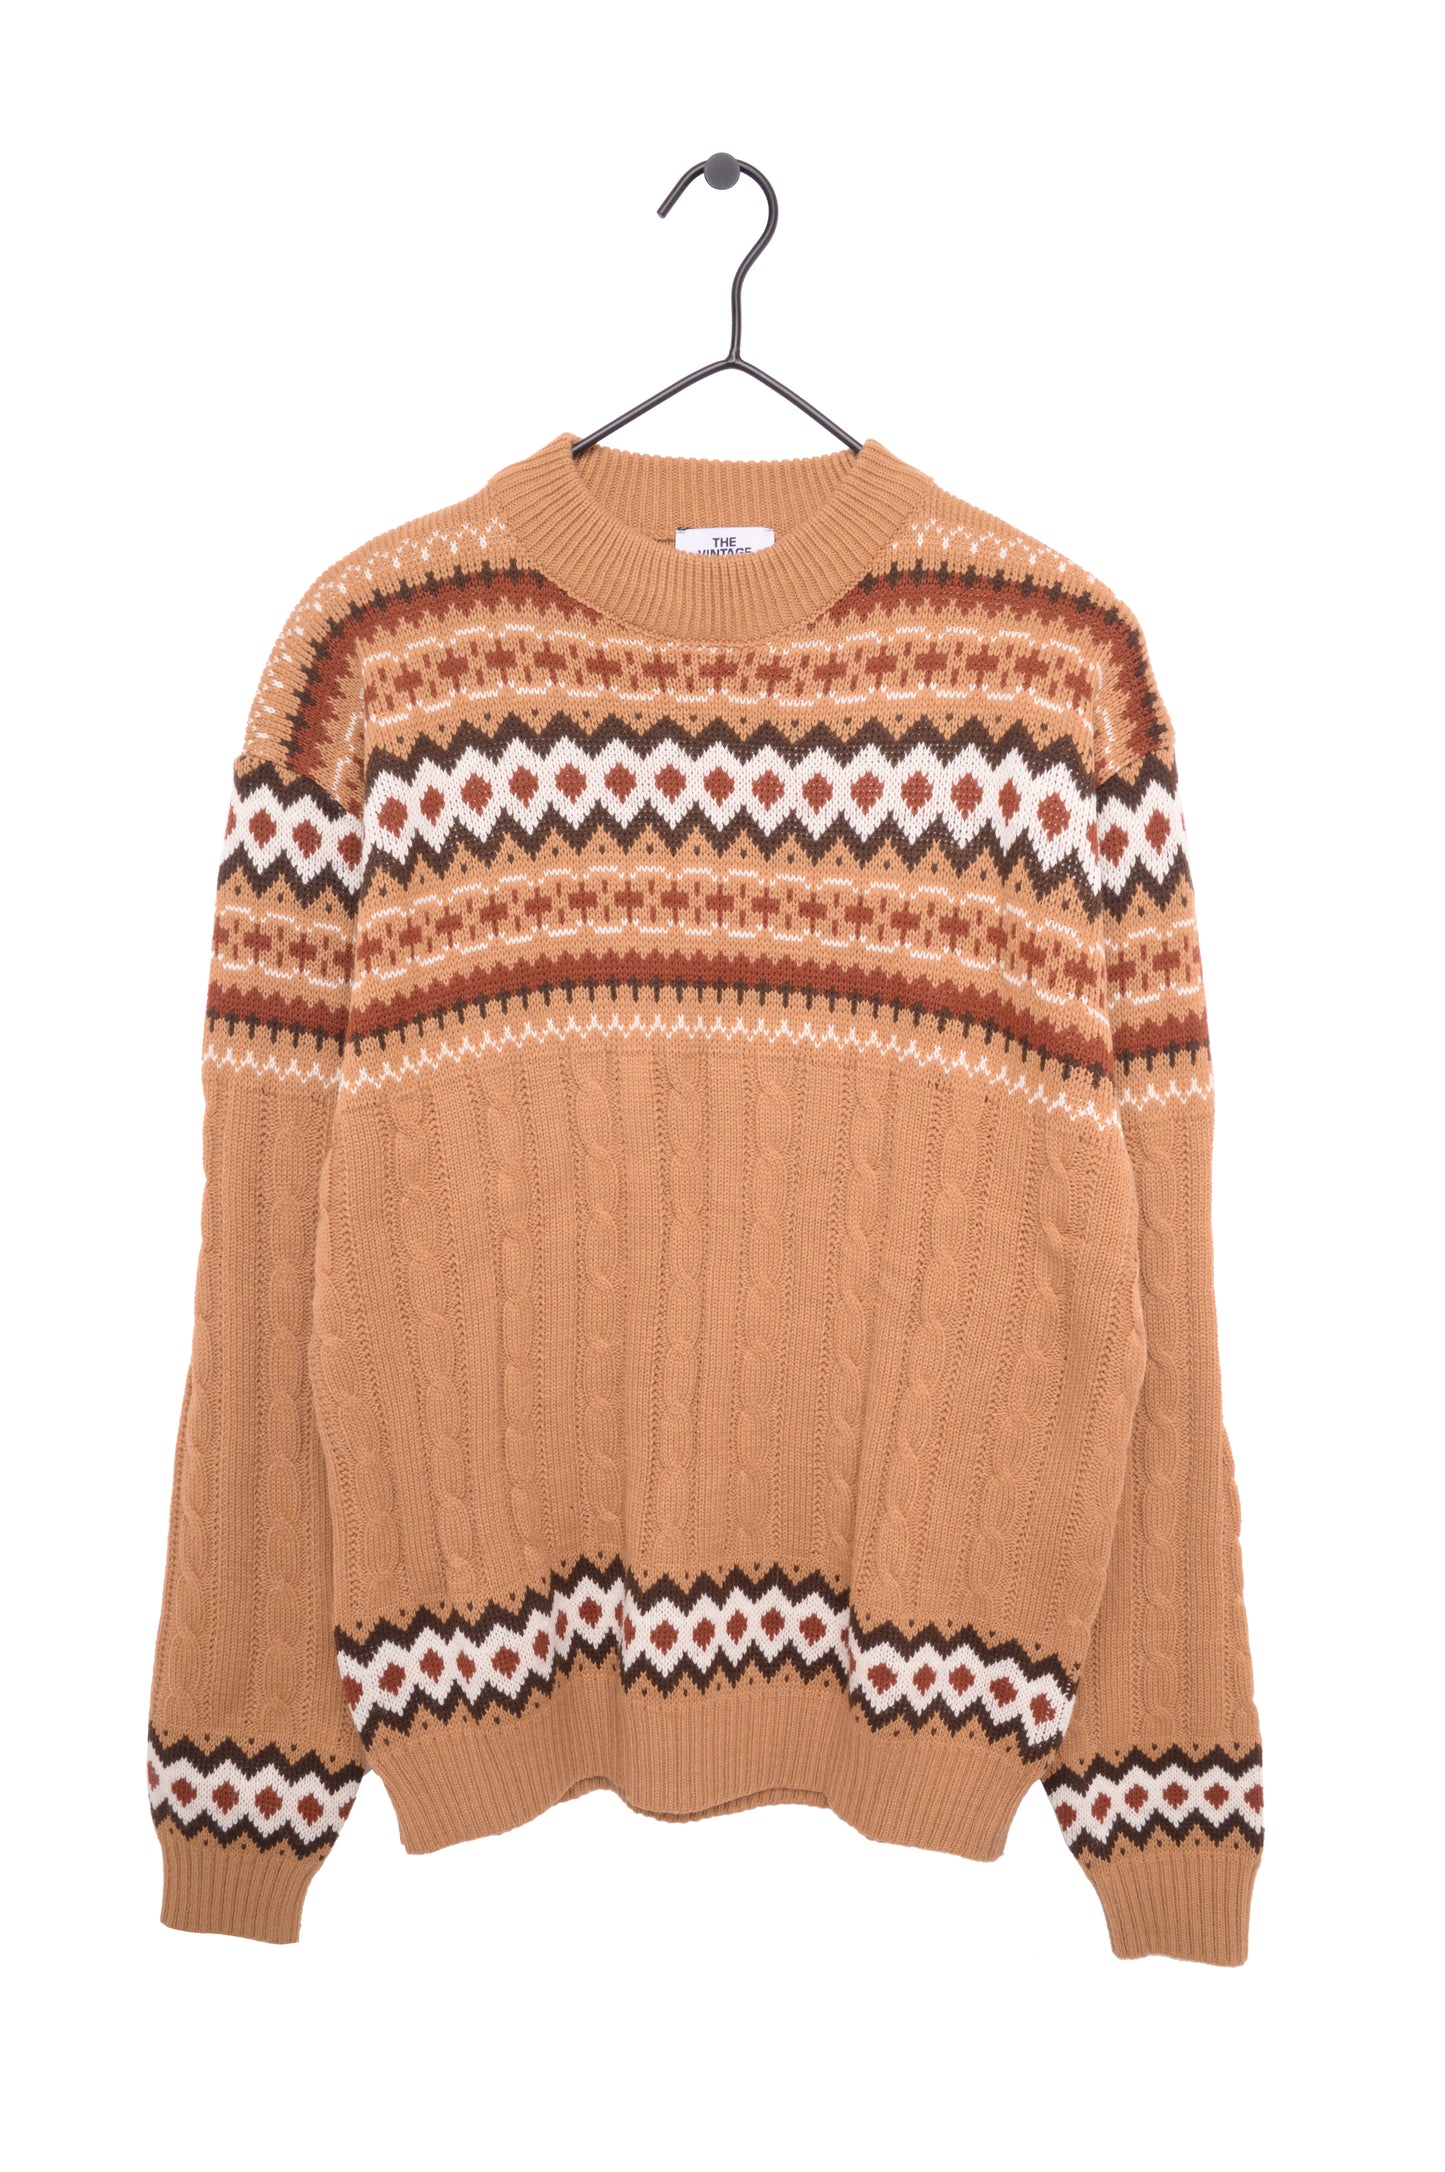 Geometric Cable Knit Sweater